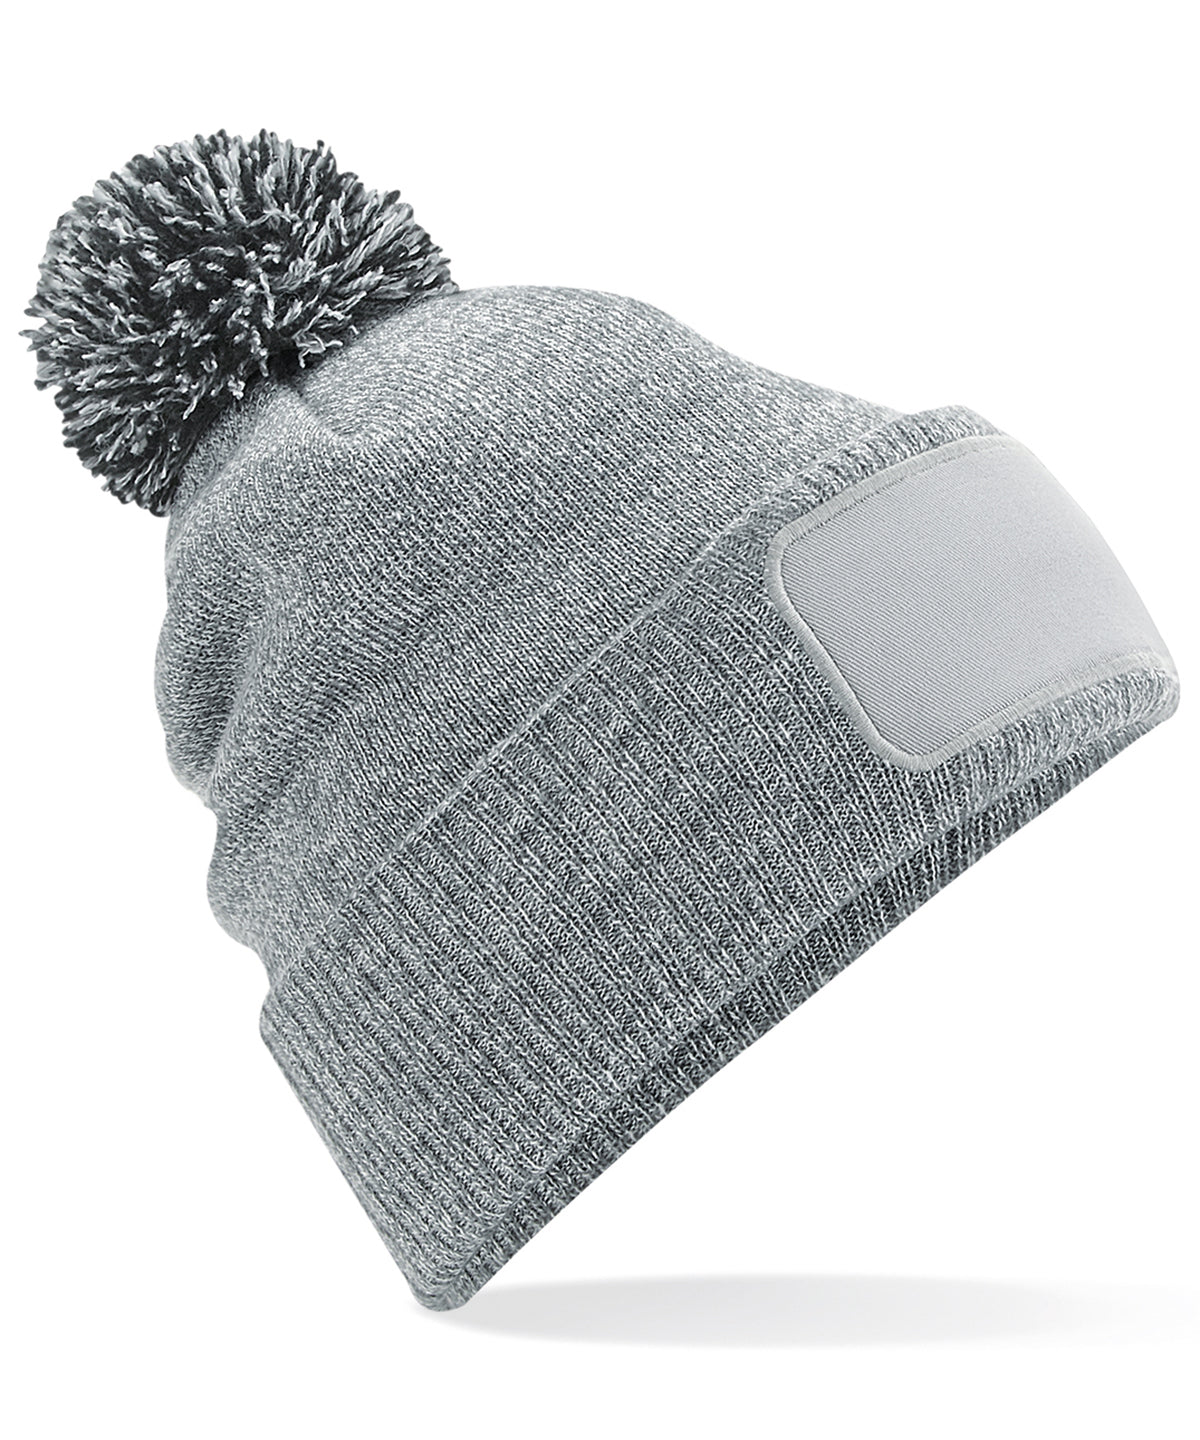 Personalised Hats - Heather Grey Beechfield Snowstar® patch beanie